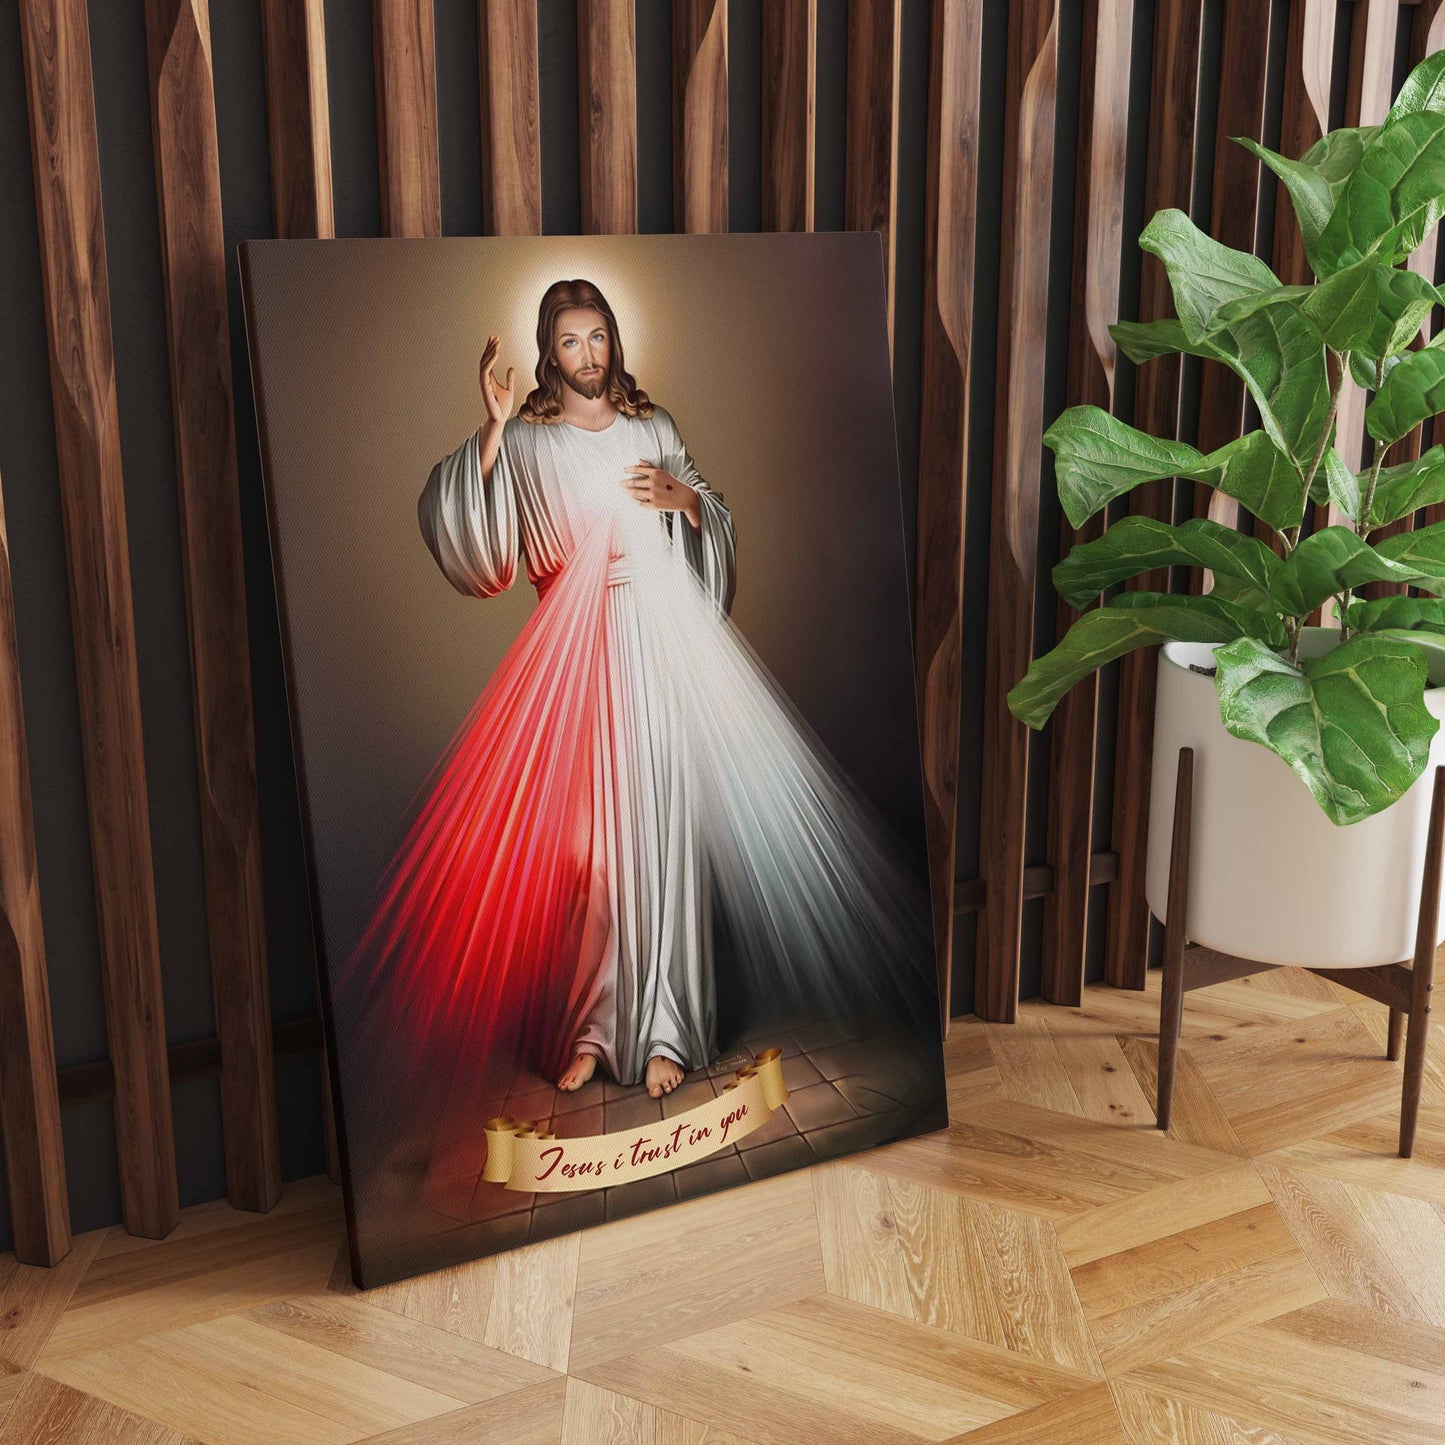 Resurrection Radiance: A Dynamic Wall Art Depicting Jesus' Triumph with White and Red Rays - Embrace the Divine Transformation and Radiant Renewal - S05E53